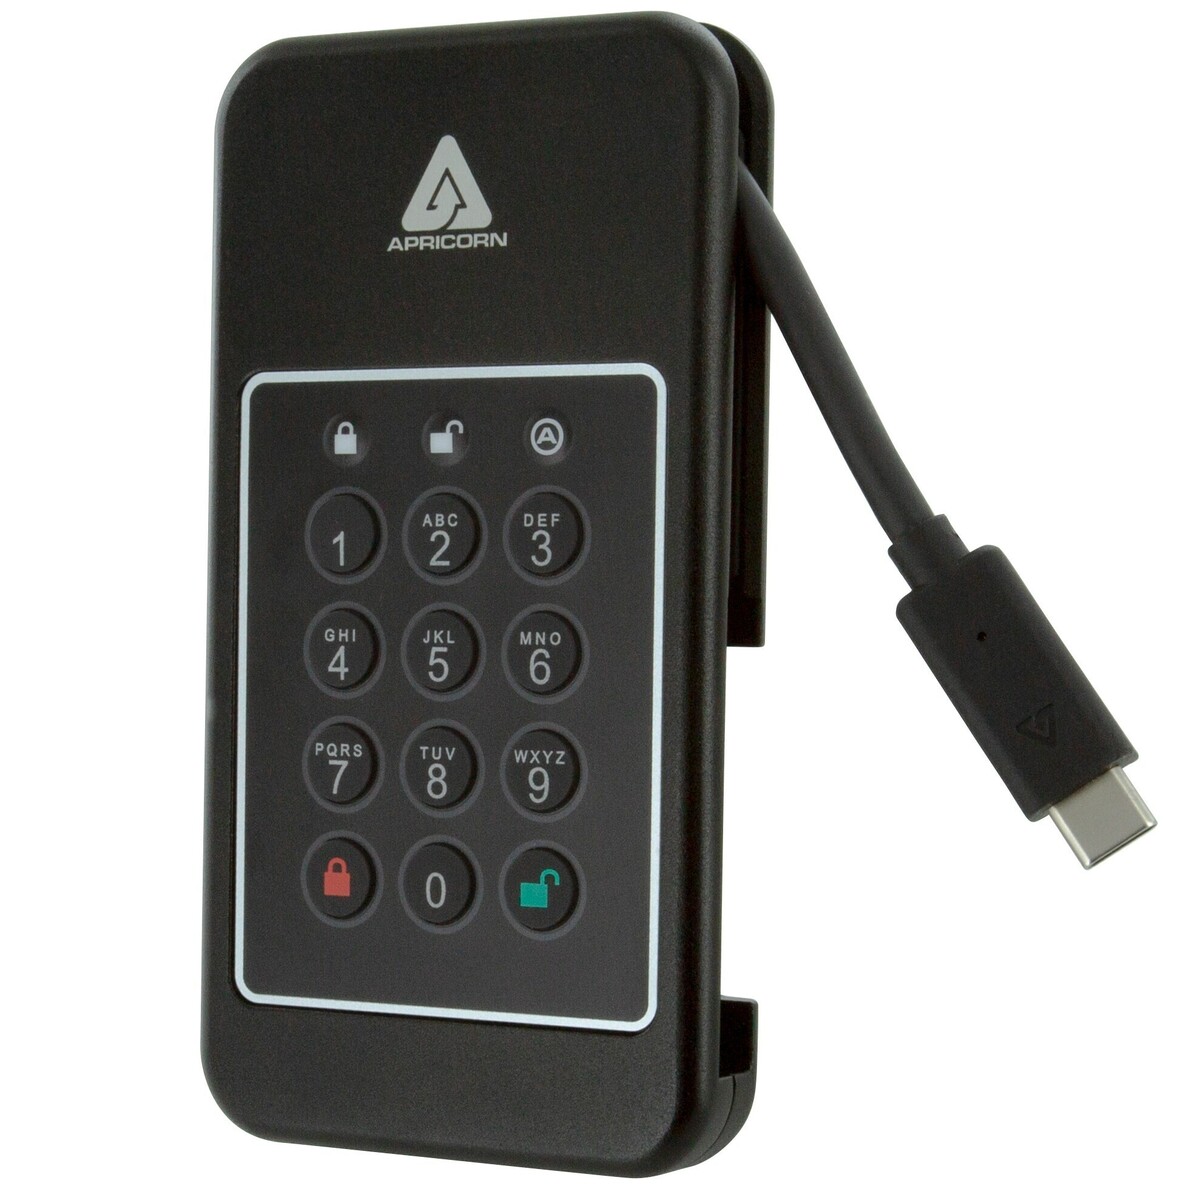 Apricorn introduces the Aegis NVX hardware-encrypted USB storage device, which boasts impressive read/write speeds of 1 GB/s.